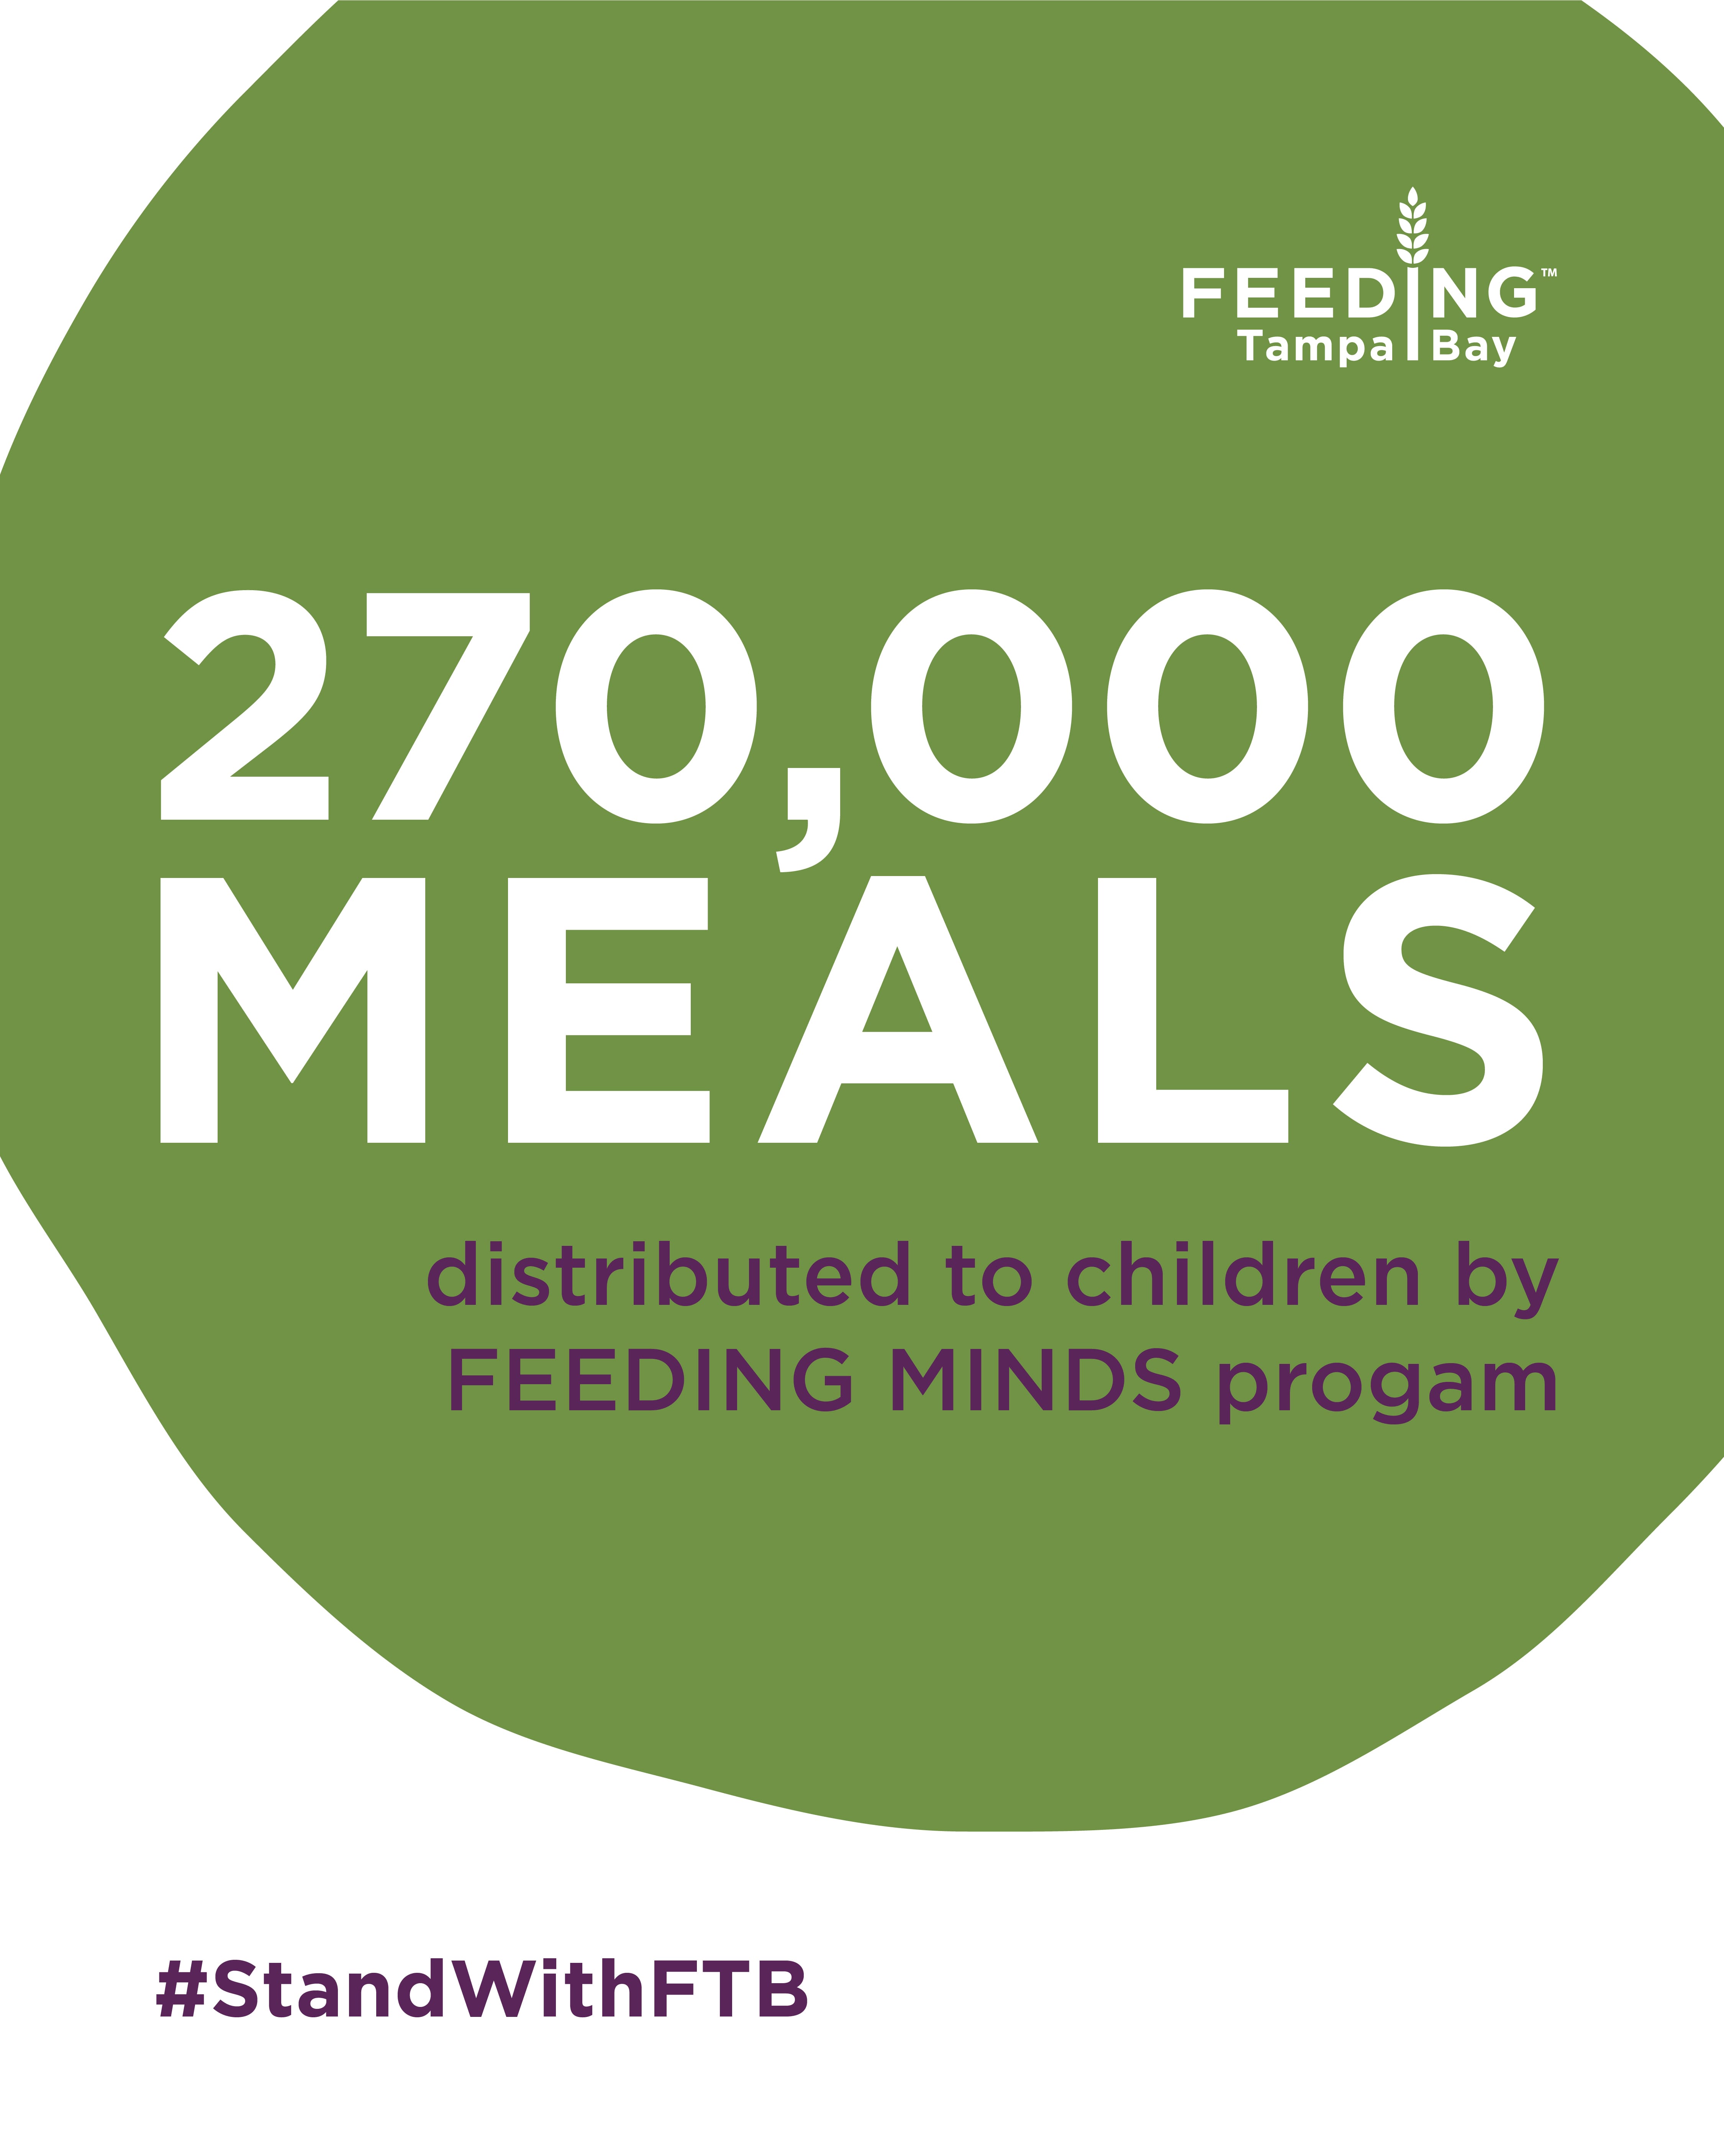 Graphic stating 270,000 meals distributed to children by feeding minds program